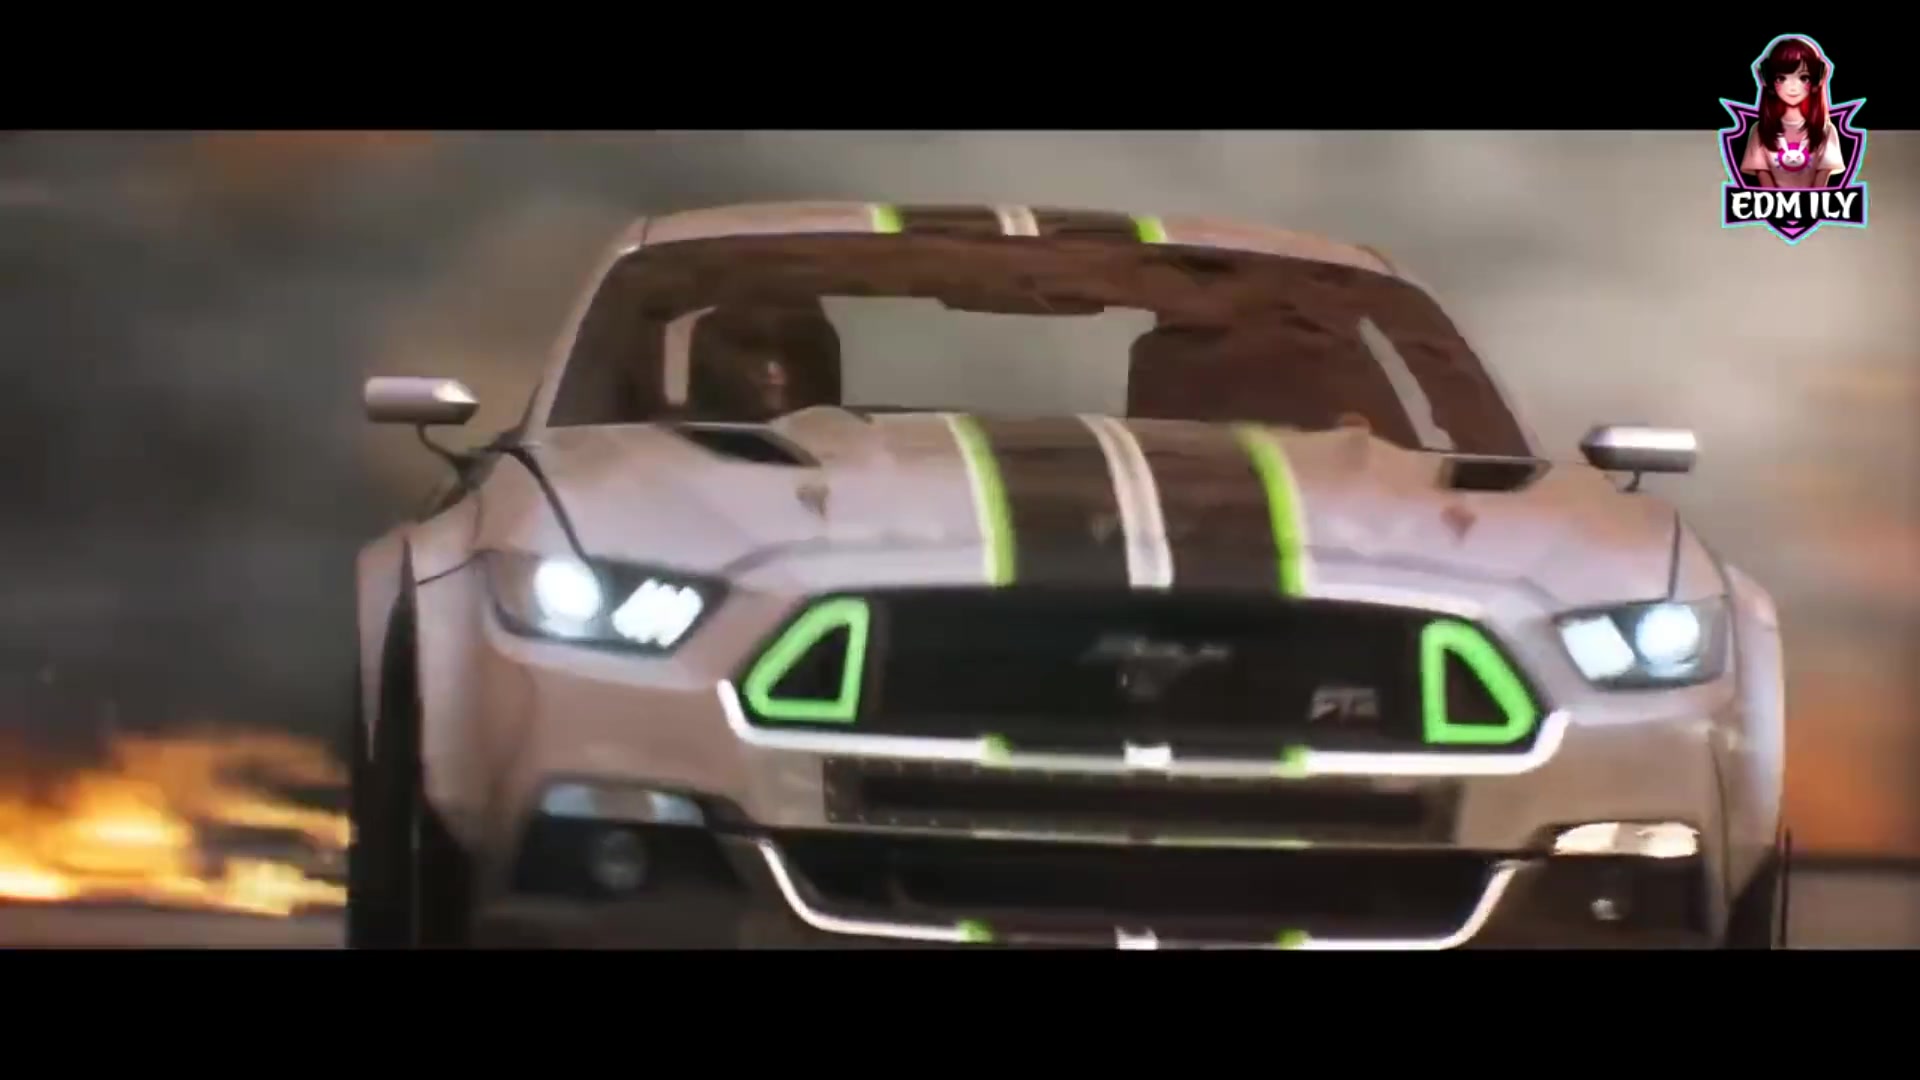 Need for speed playback. Ford Mustang NFS Payback. Ford Mustang NFS 2015. NFS 2015 Ford Mustang gt. NFS Payback Мустанг.